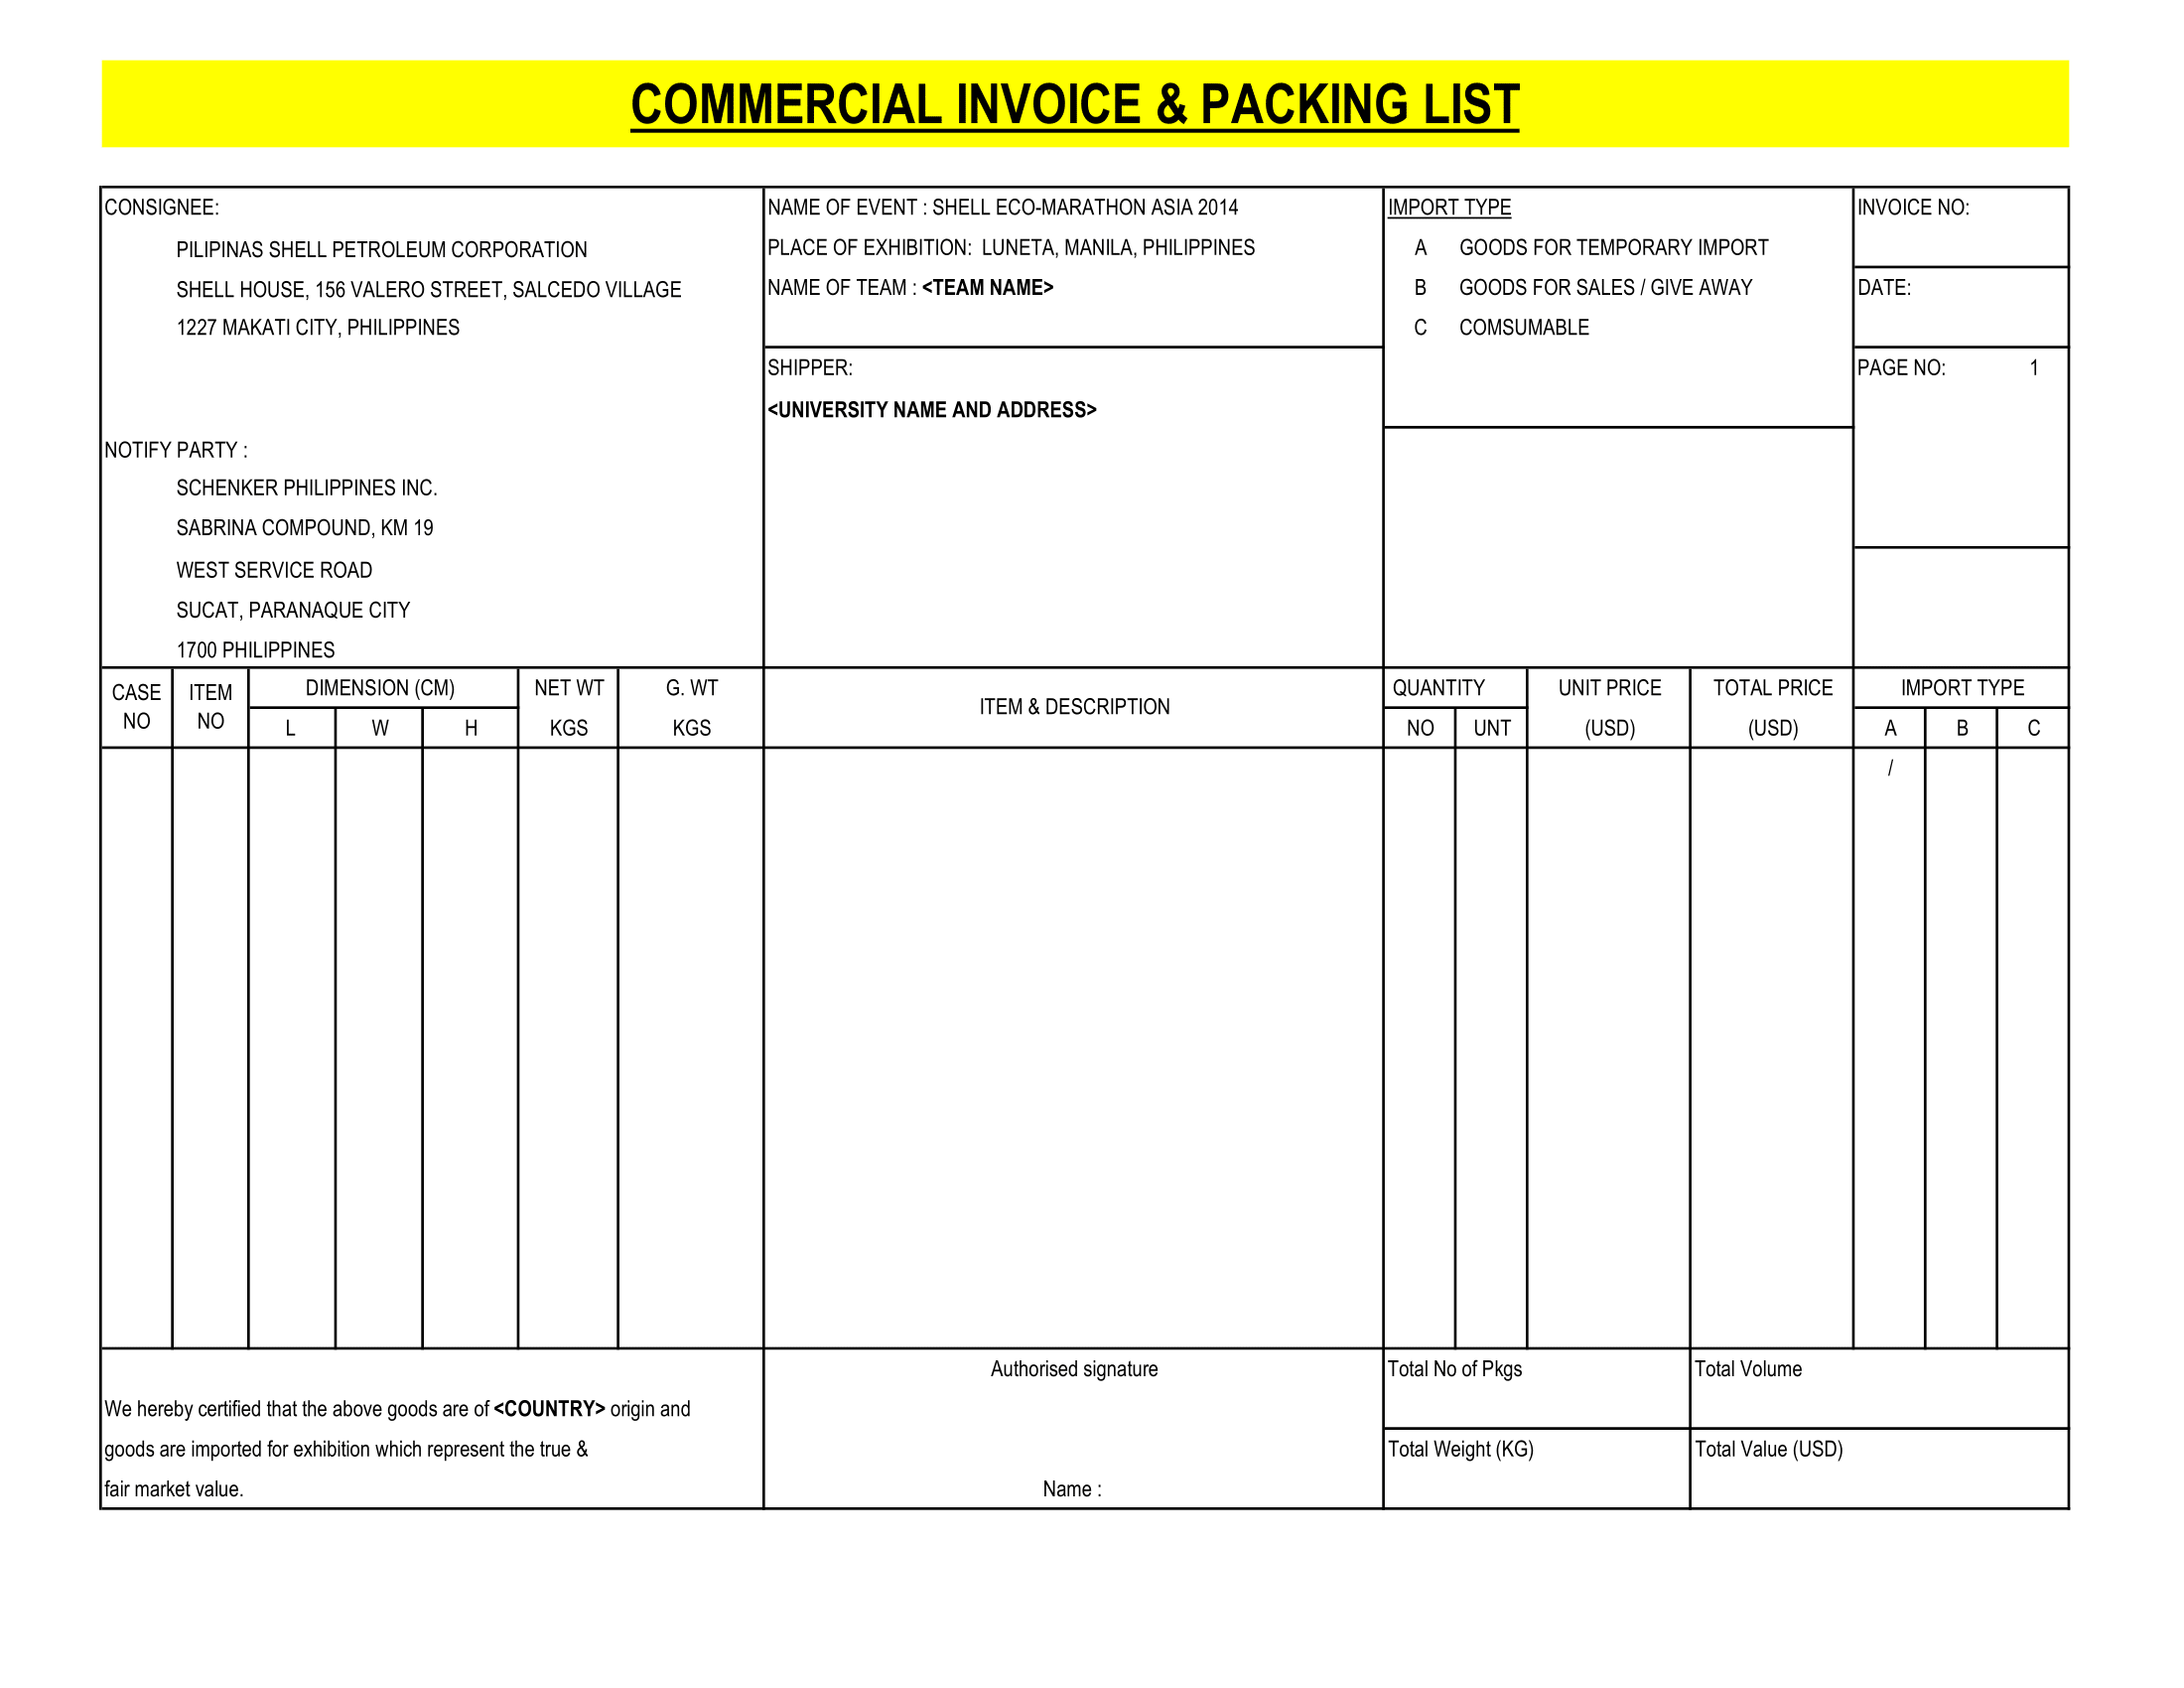 commercial Invoice and Packaging List Template in Excel